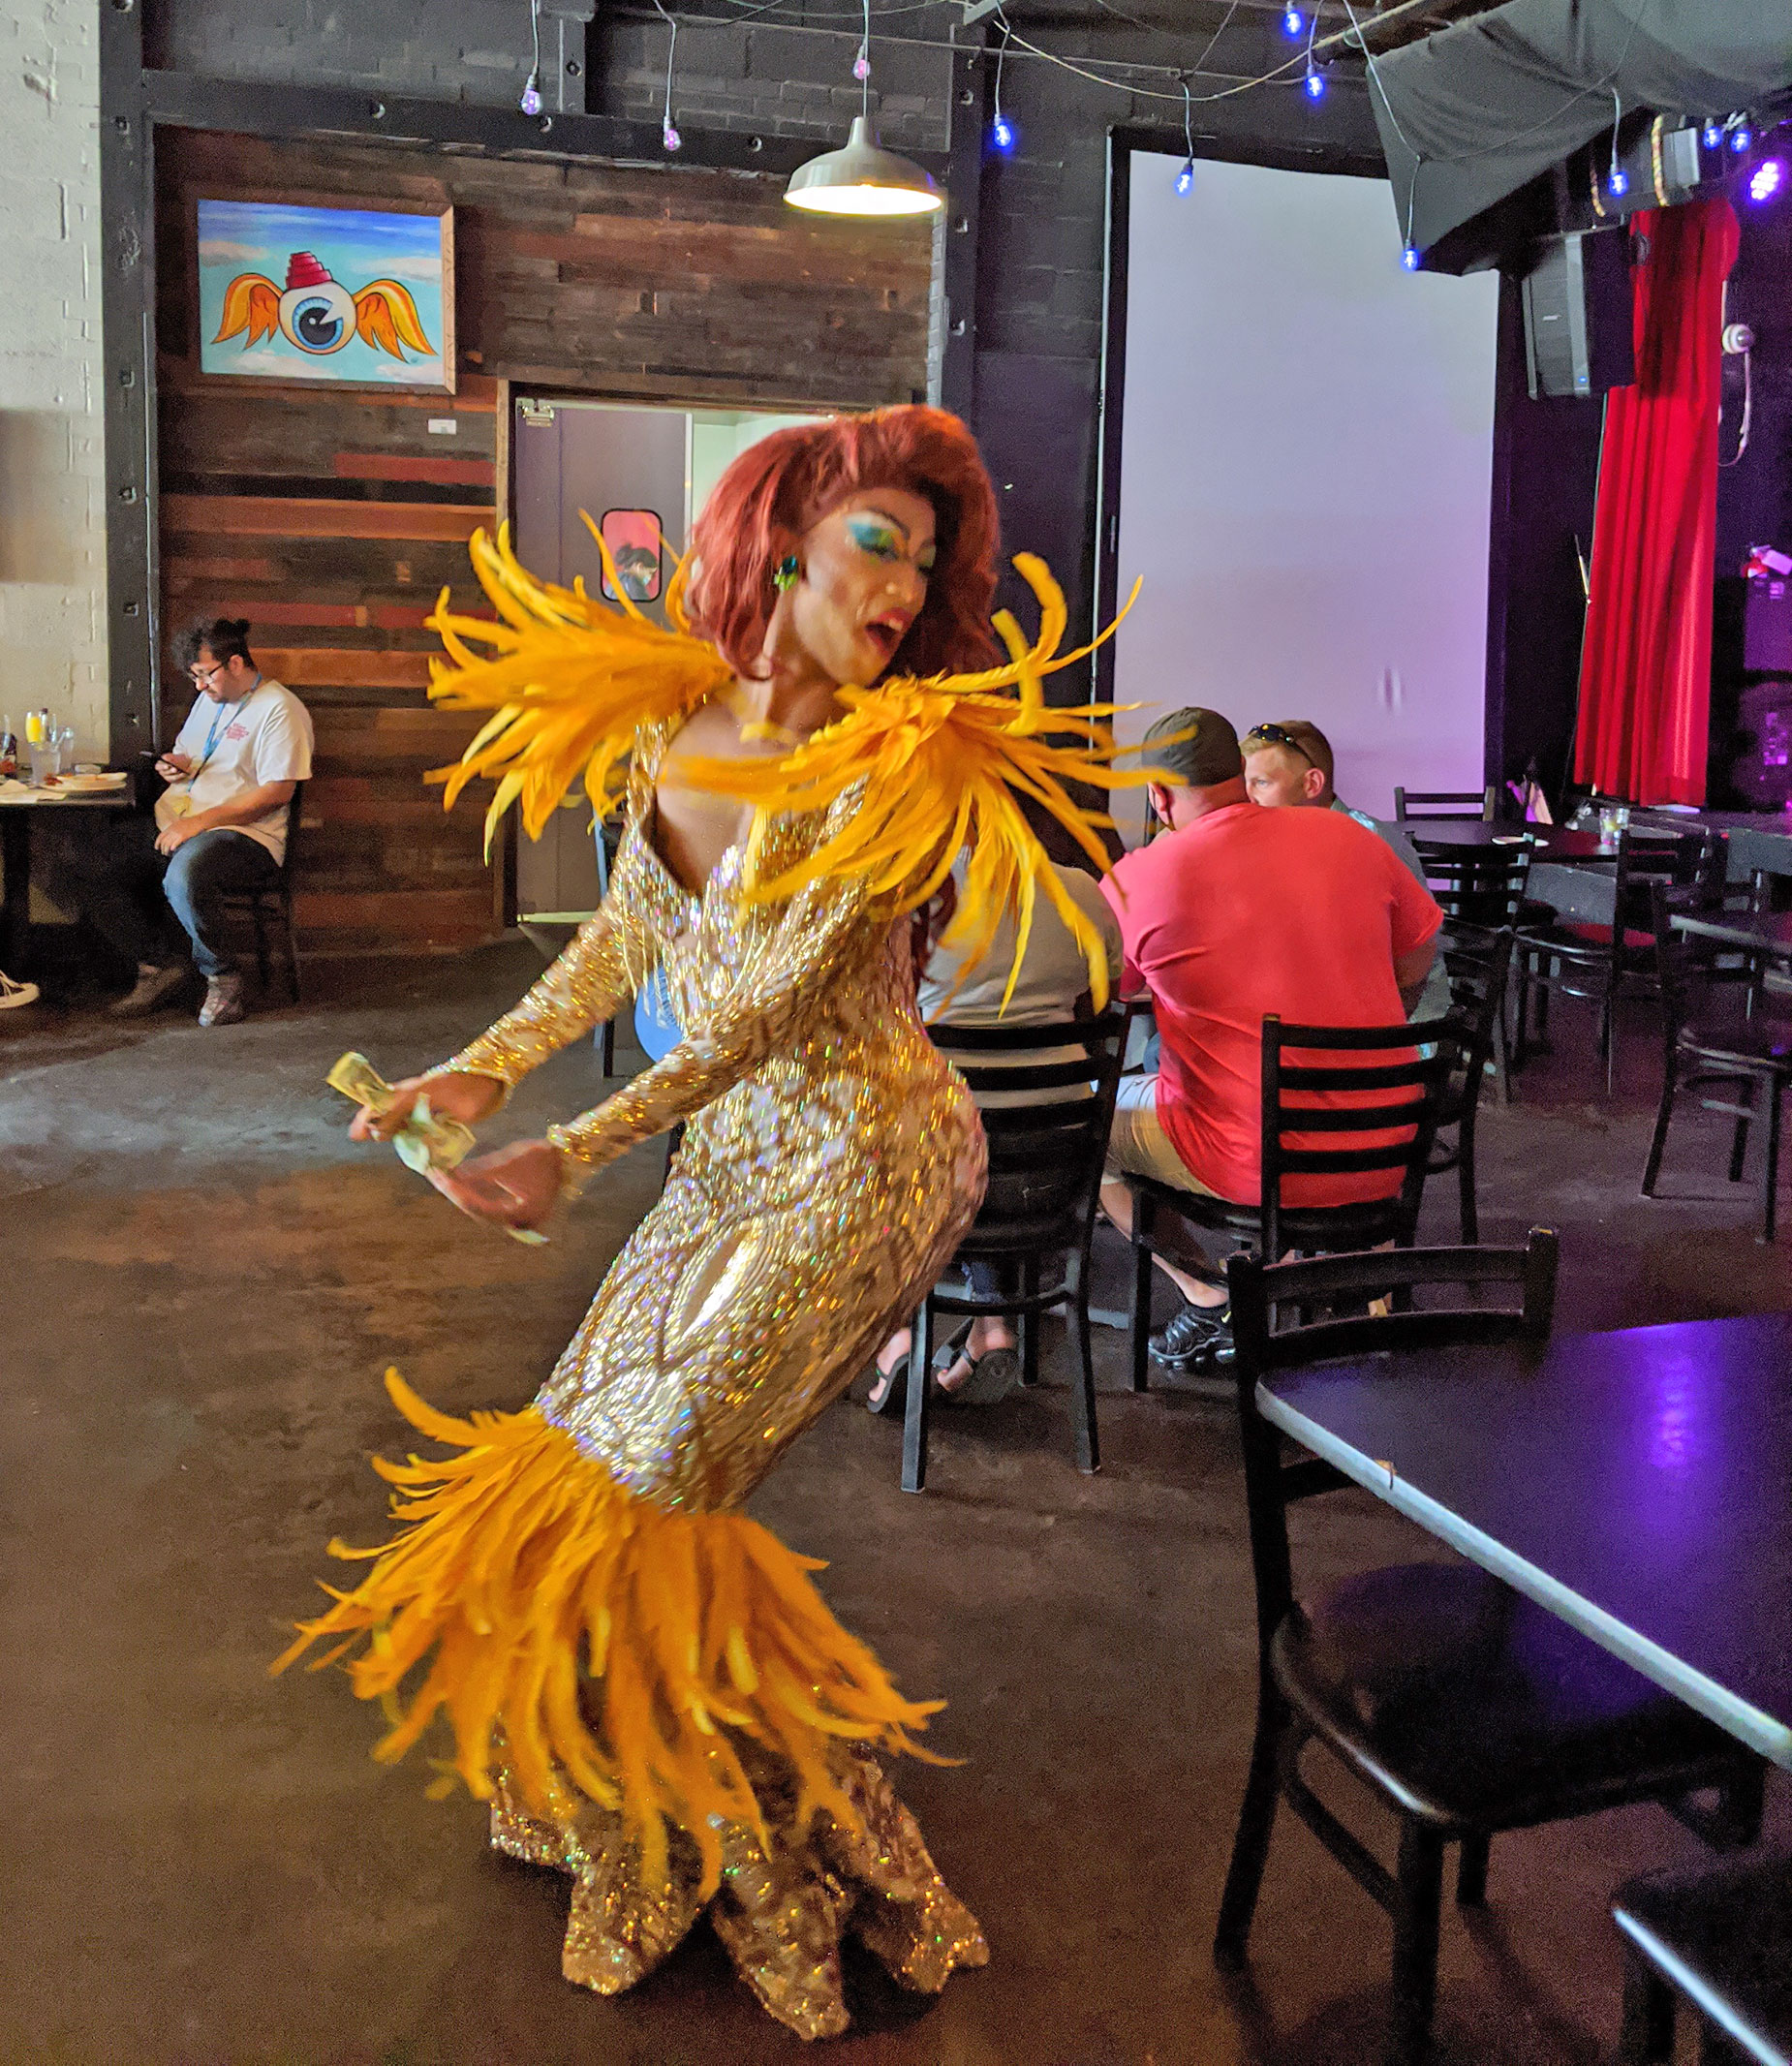 Dallas drag queen Kylee O'Hara Fatale performing in a gown.